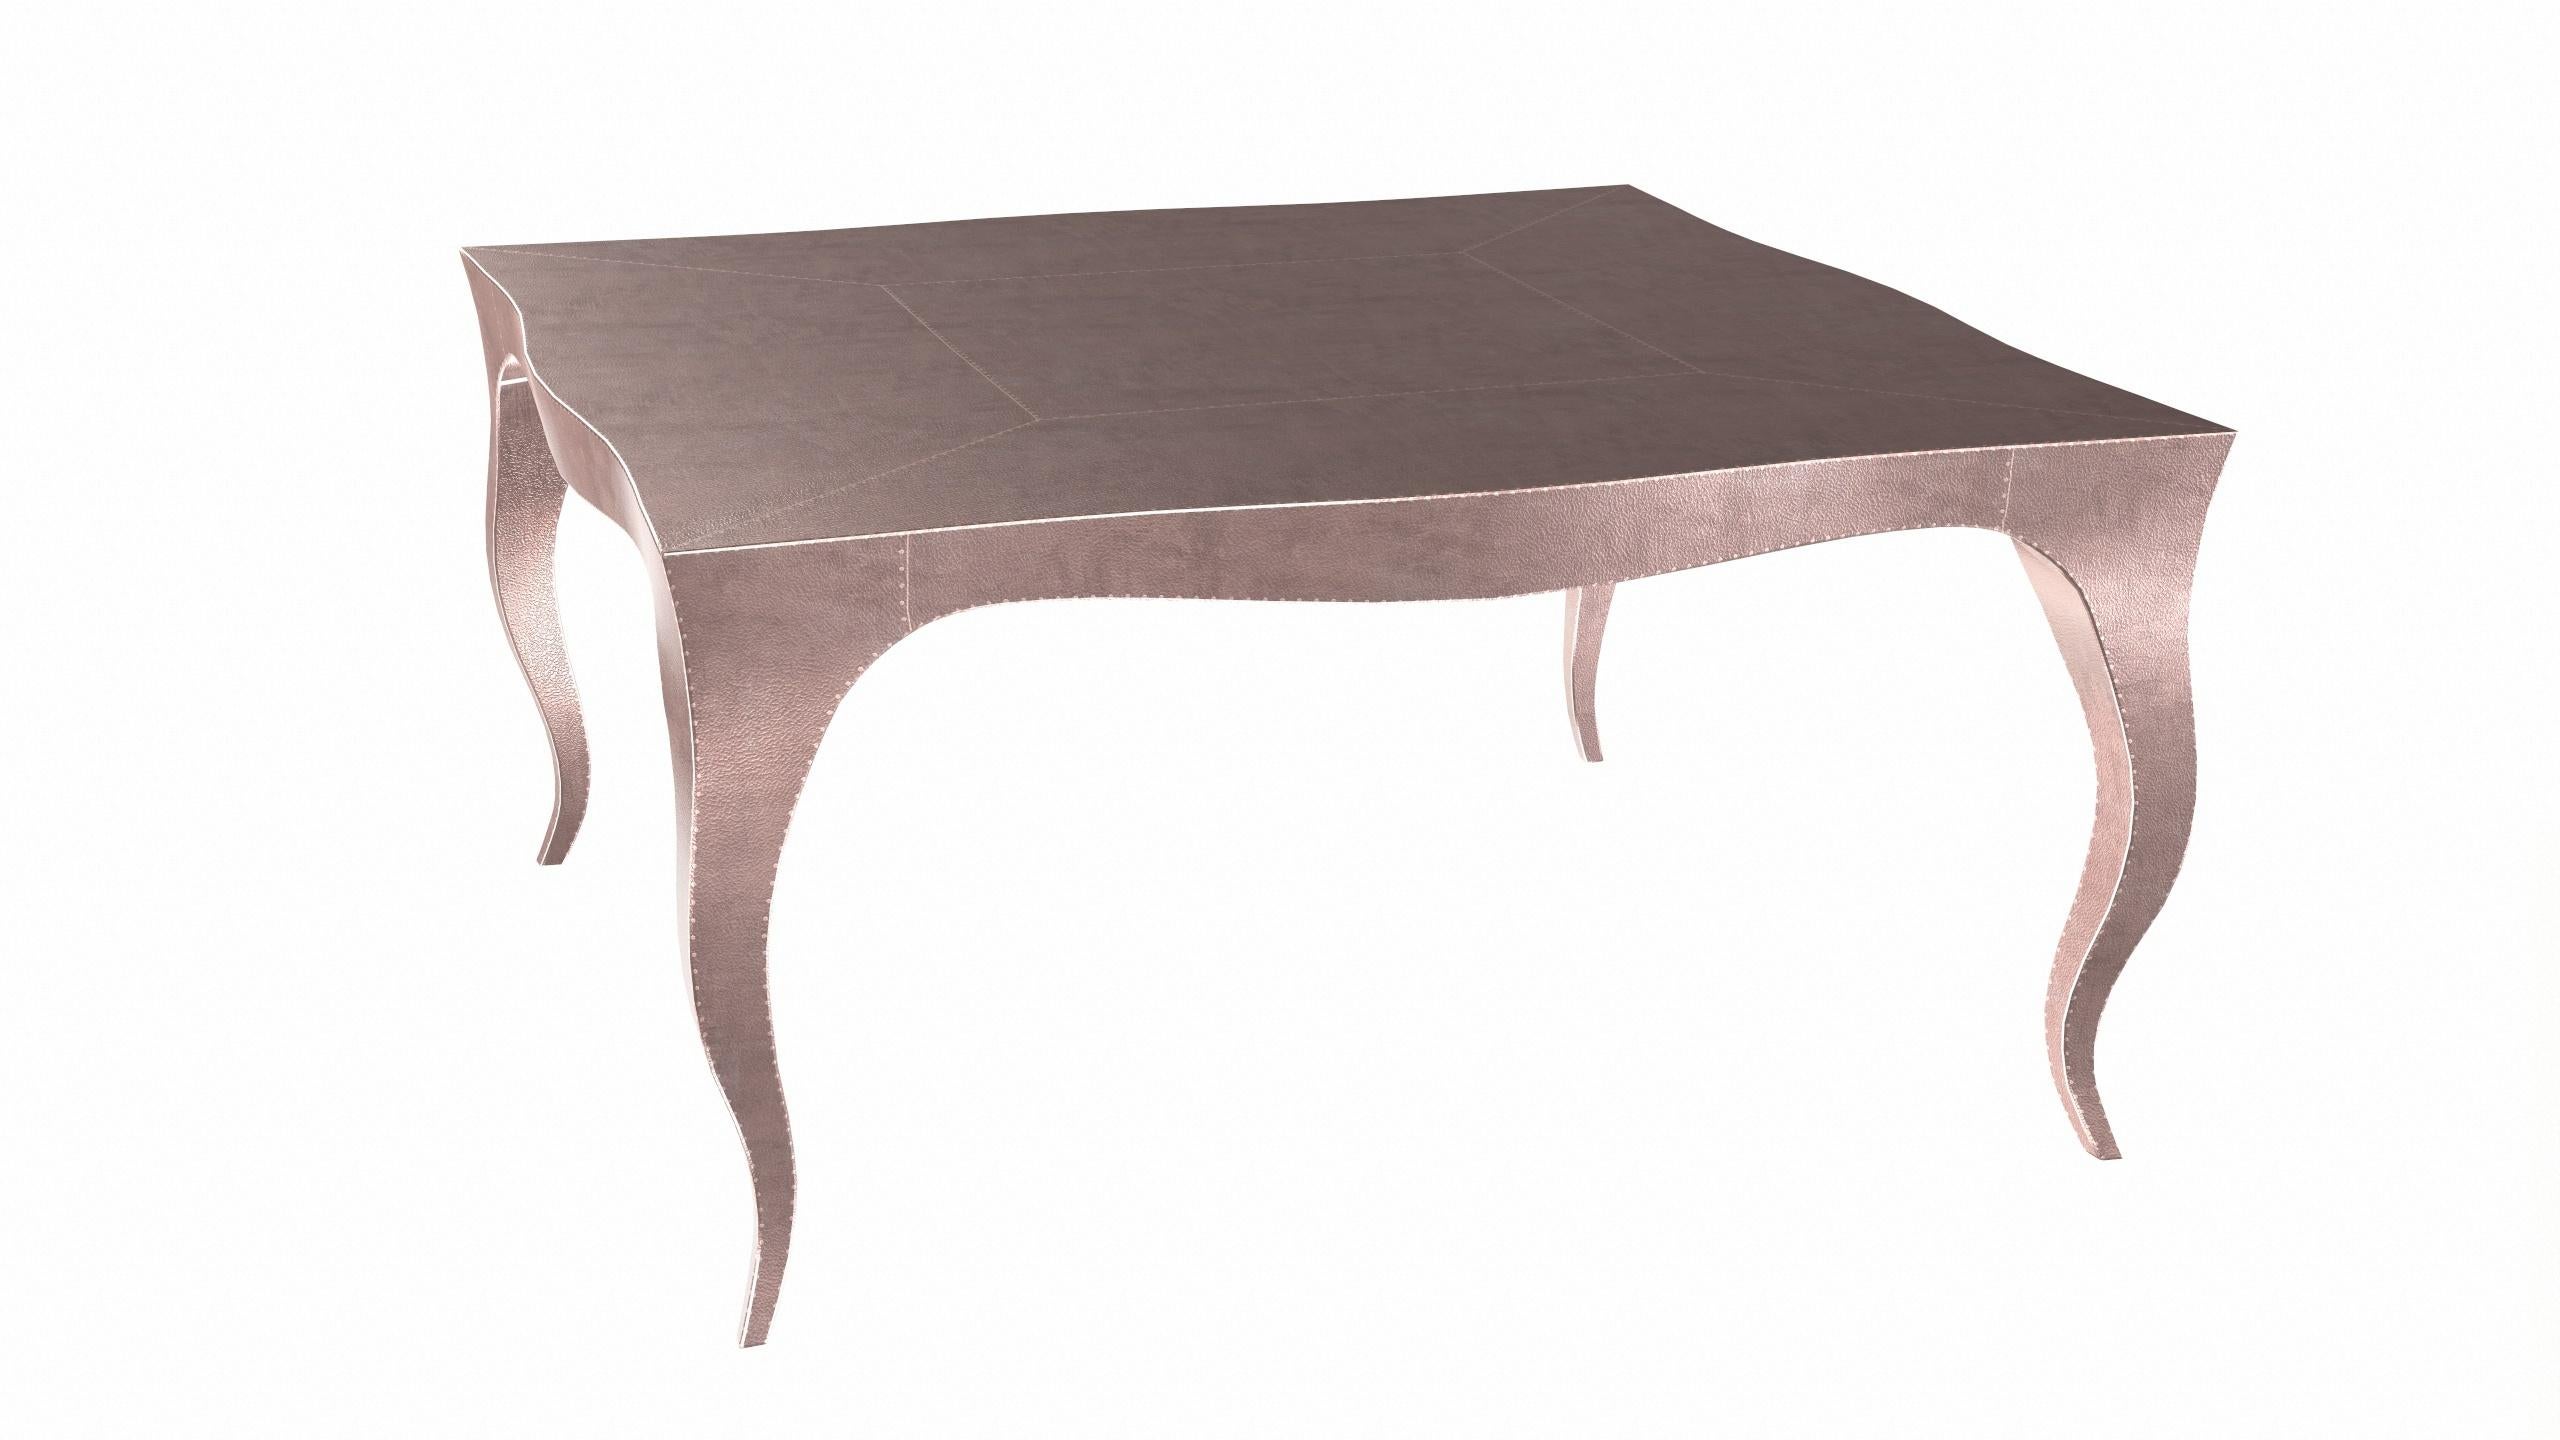 Metal Louise Art Deco Coffee Tables Fine Hammered Copper 18.5x18.5x10 inch For Sale